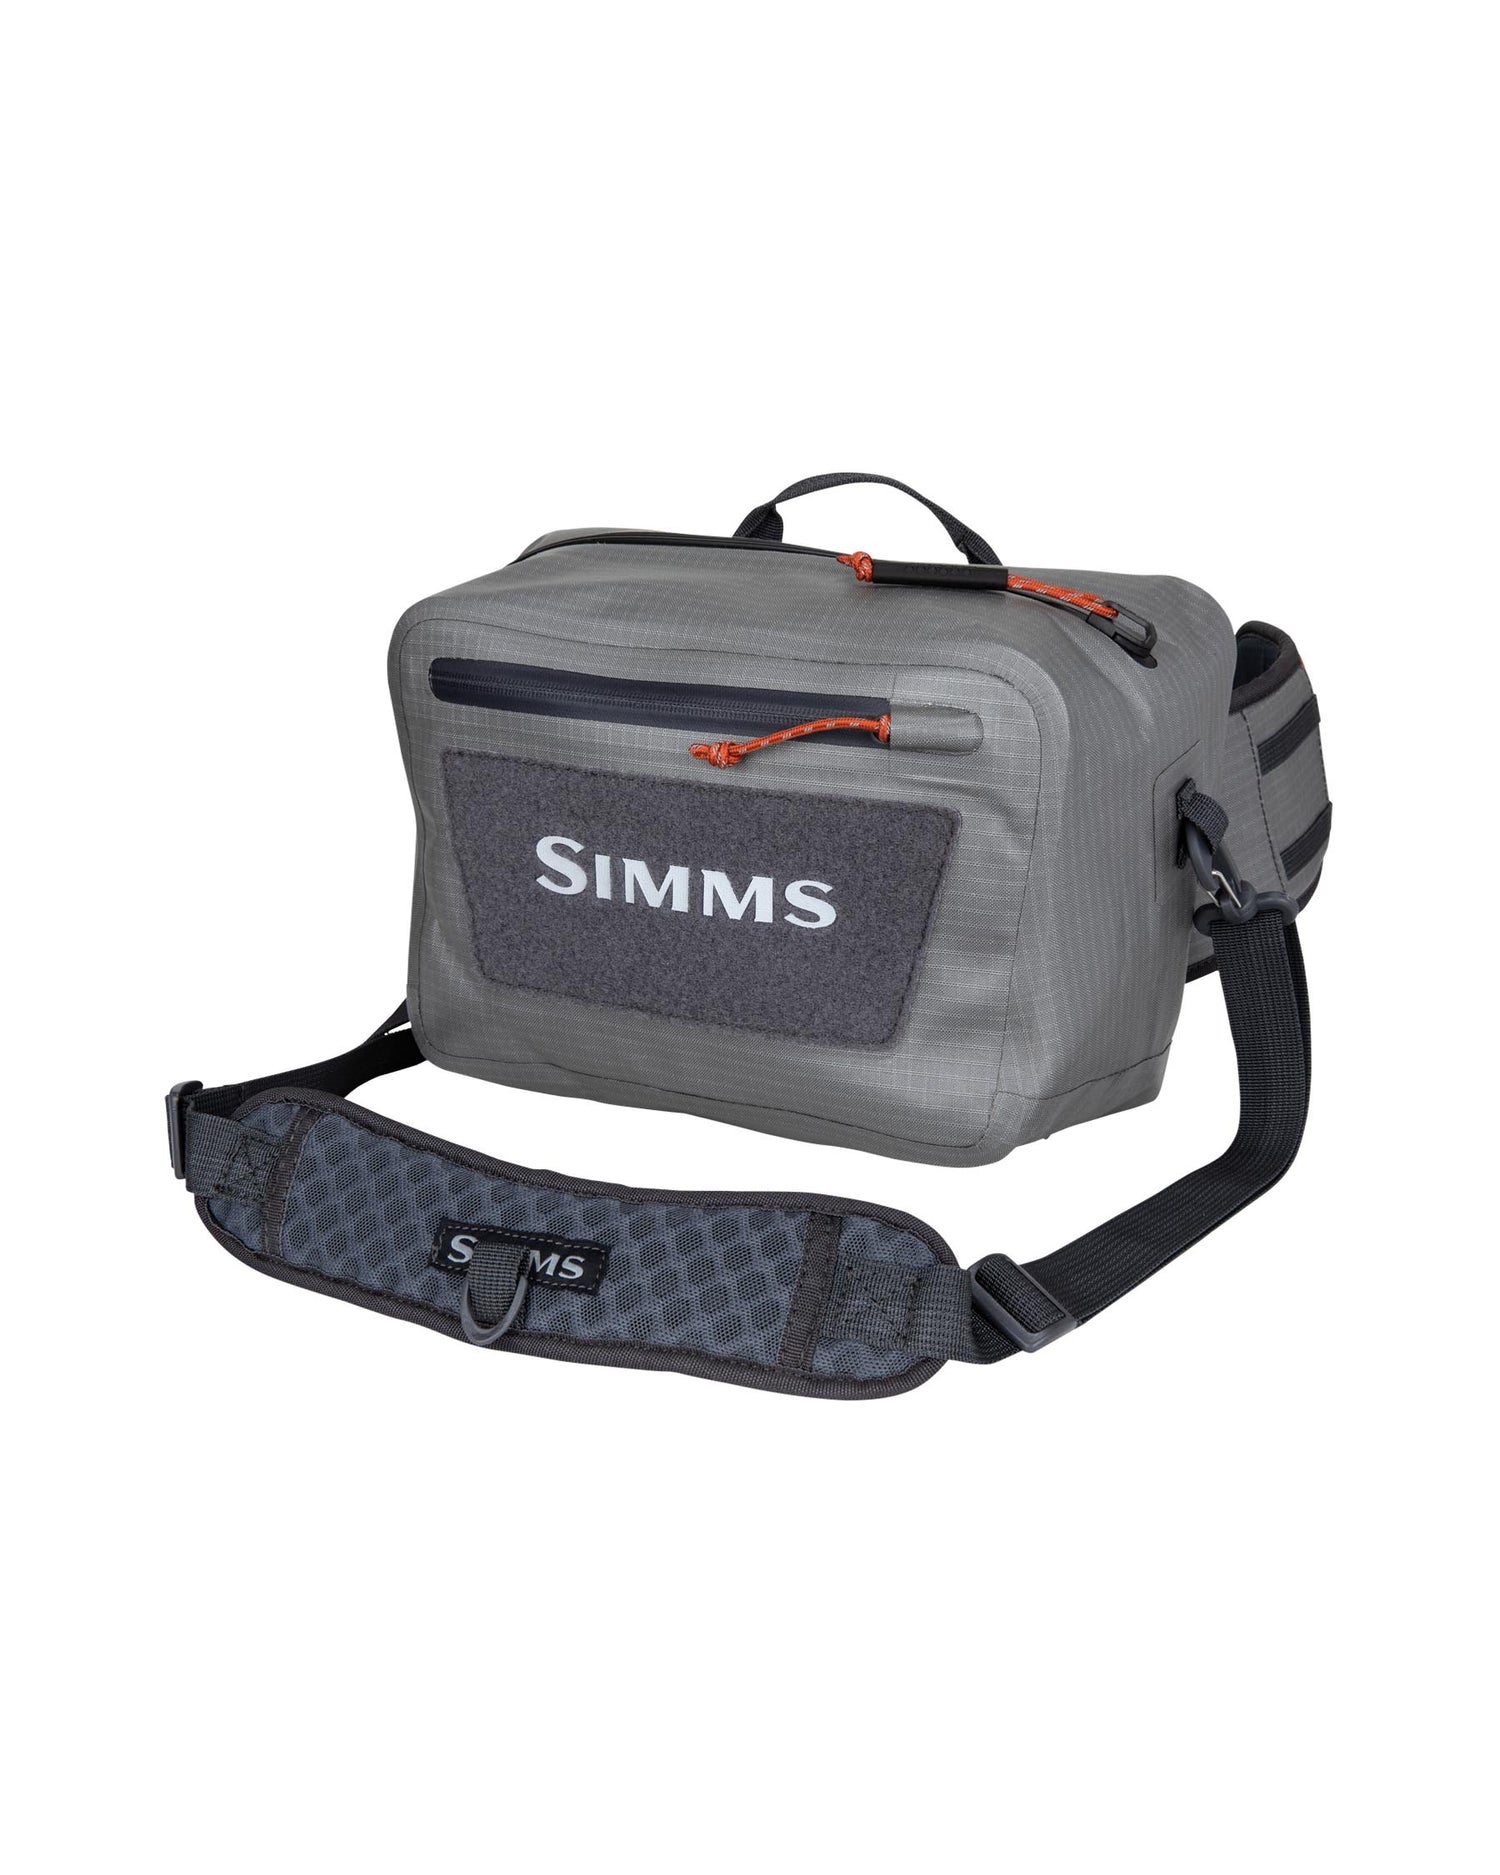 Dry Creek Z Hip Pack | Simms Fishing Products